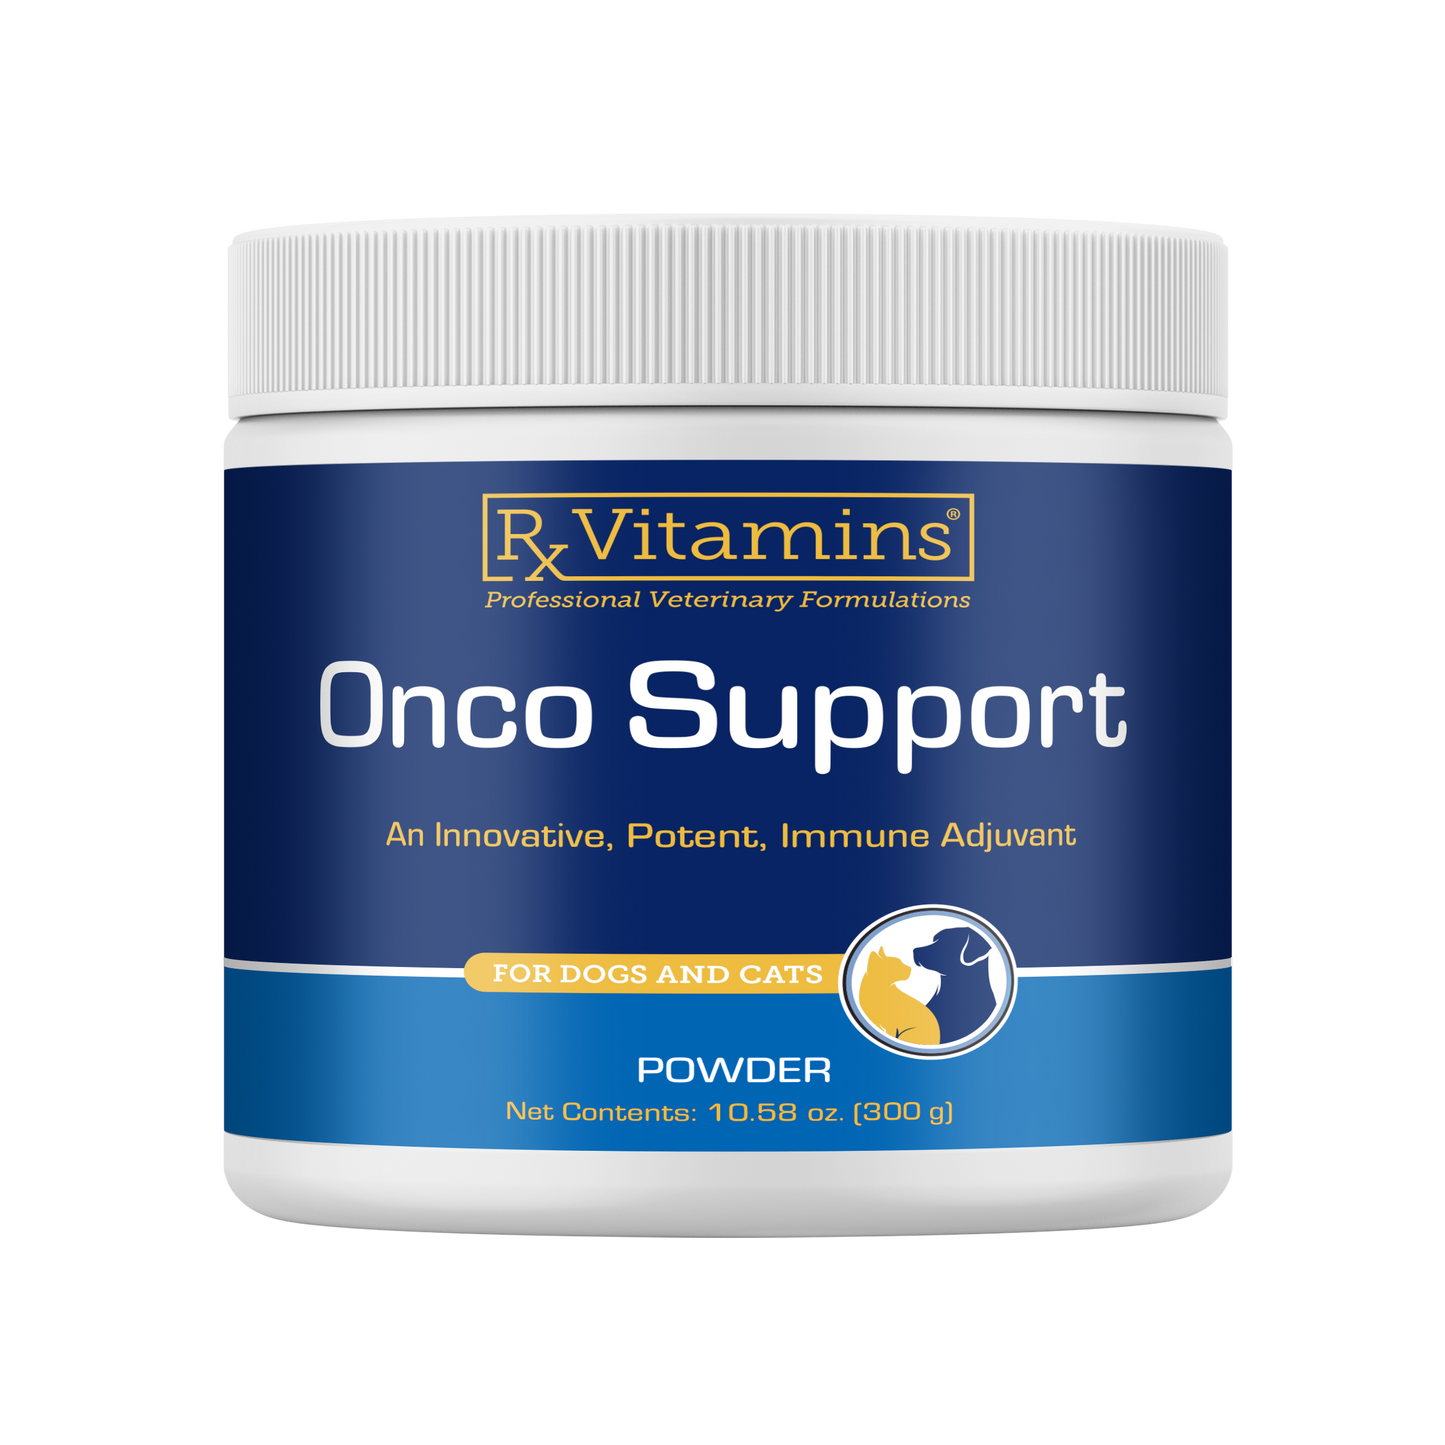 ONCO Support (300 gm Powder)